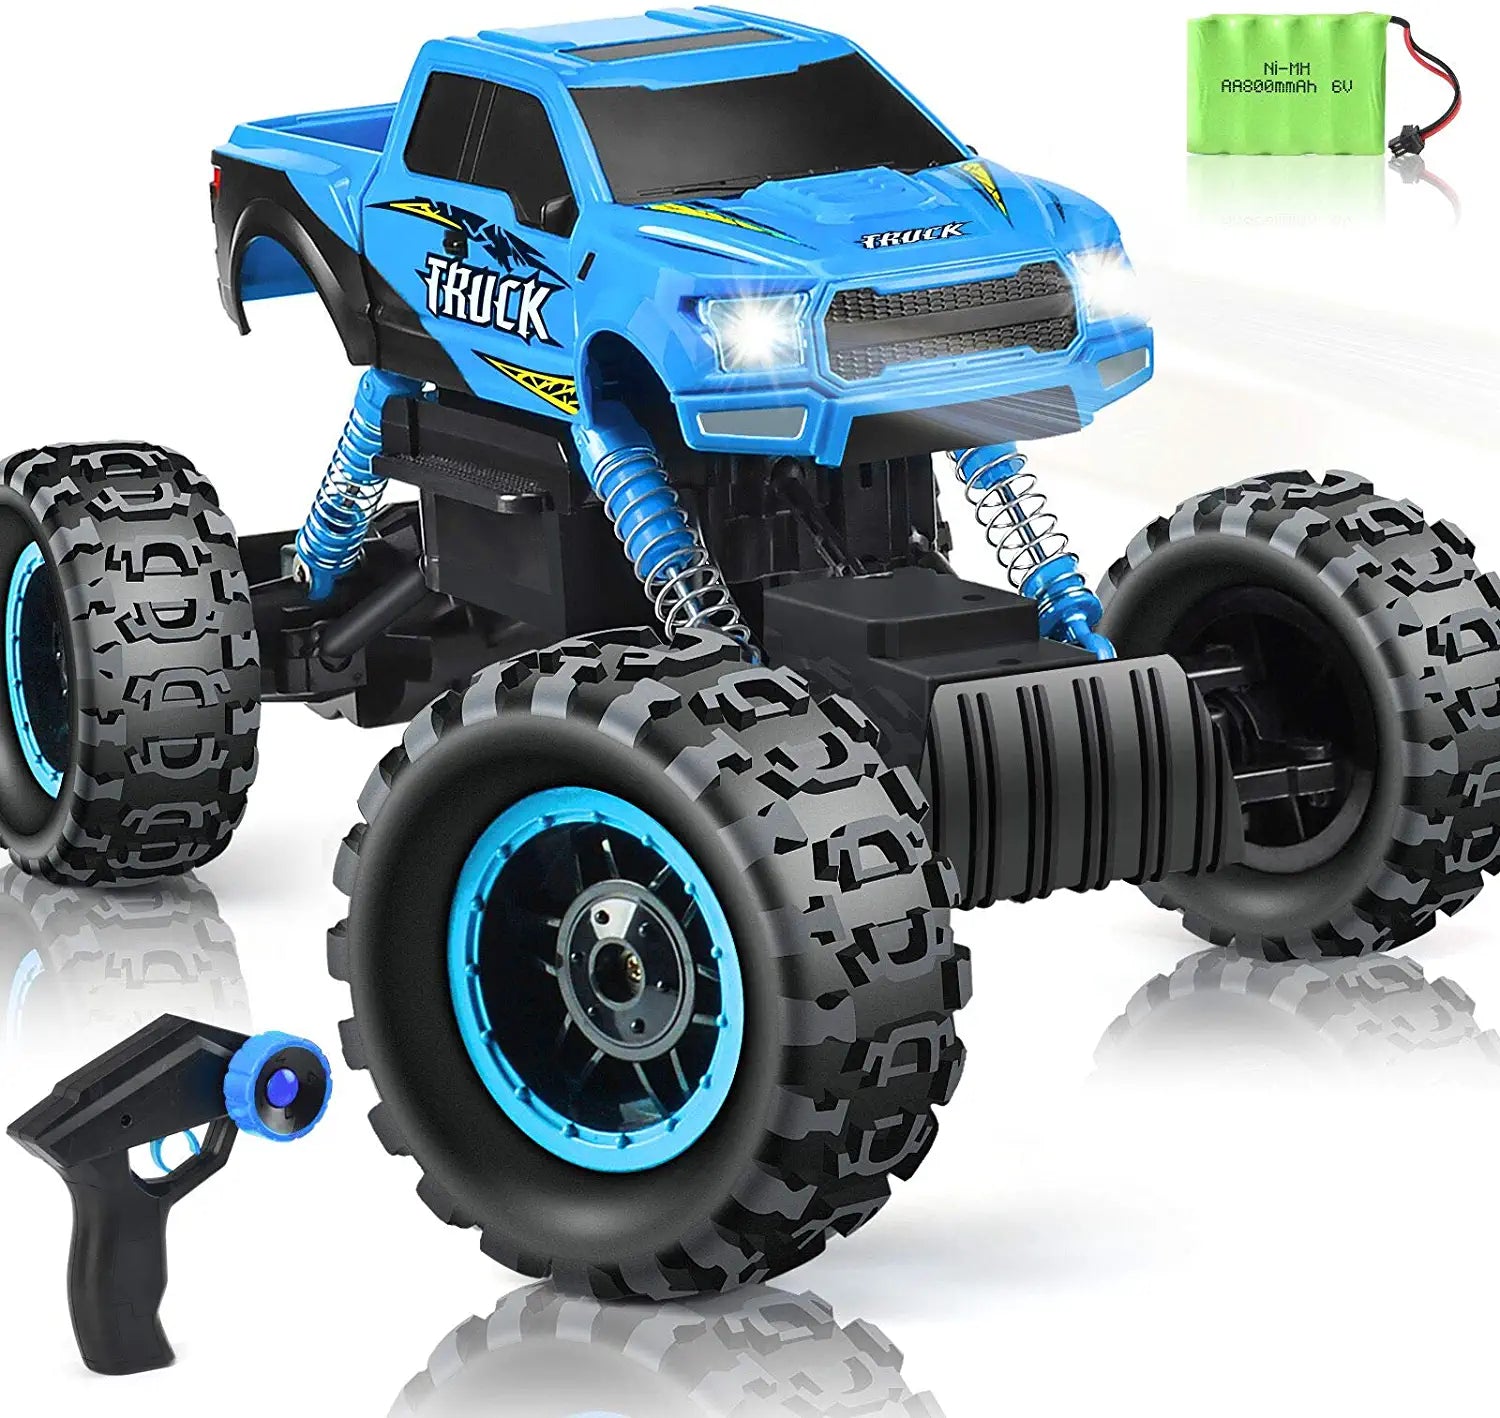 DE RC Cars for Girls Newest 1:12 Scale Remote Control Car with Rechargeable Batteries and Dual Motors off Road RC Trucks, Rc Racing Car